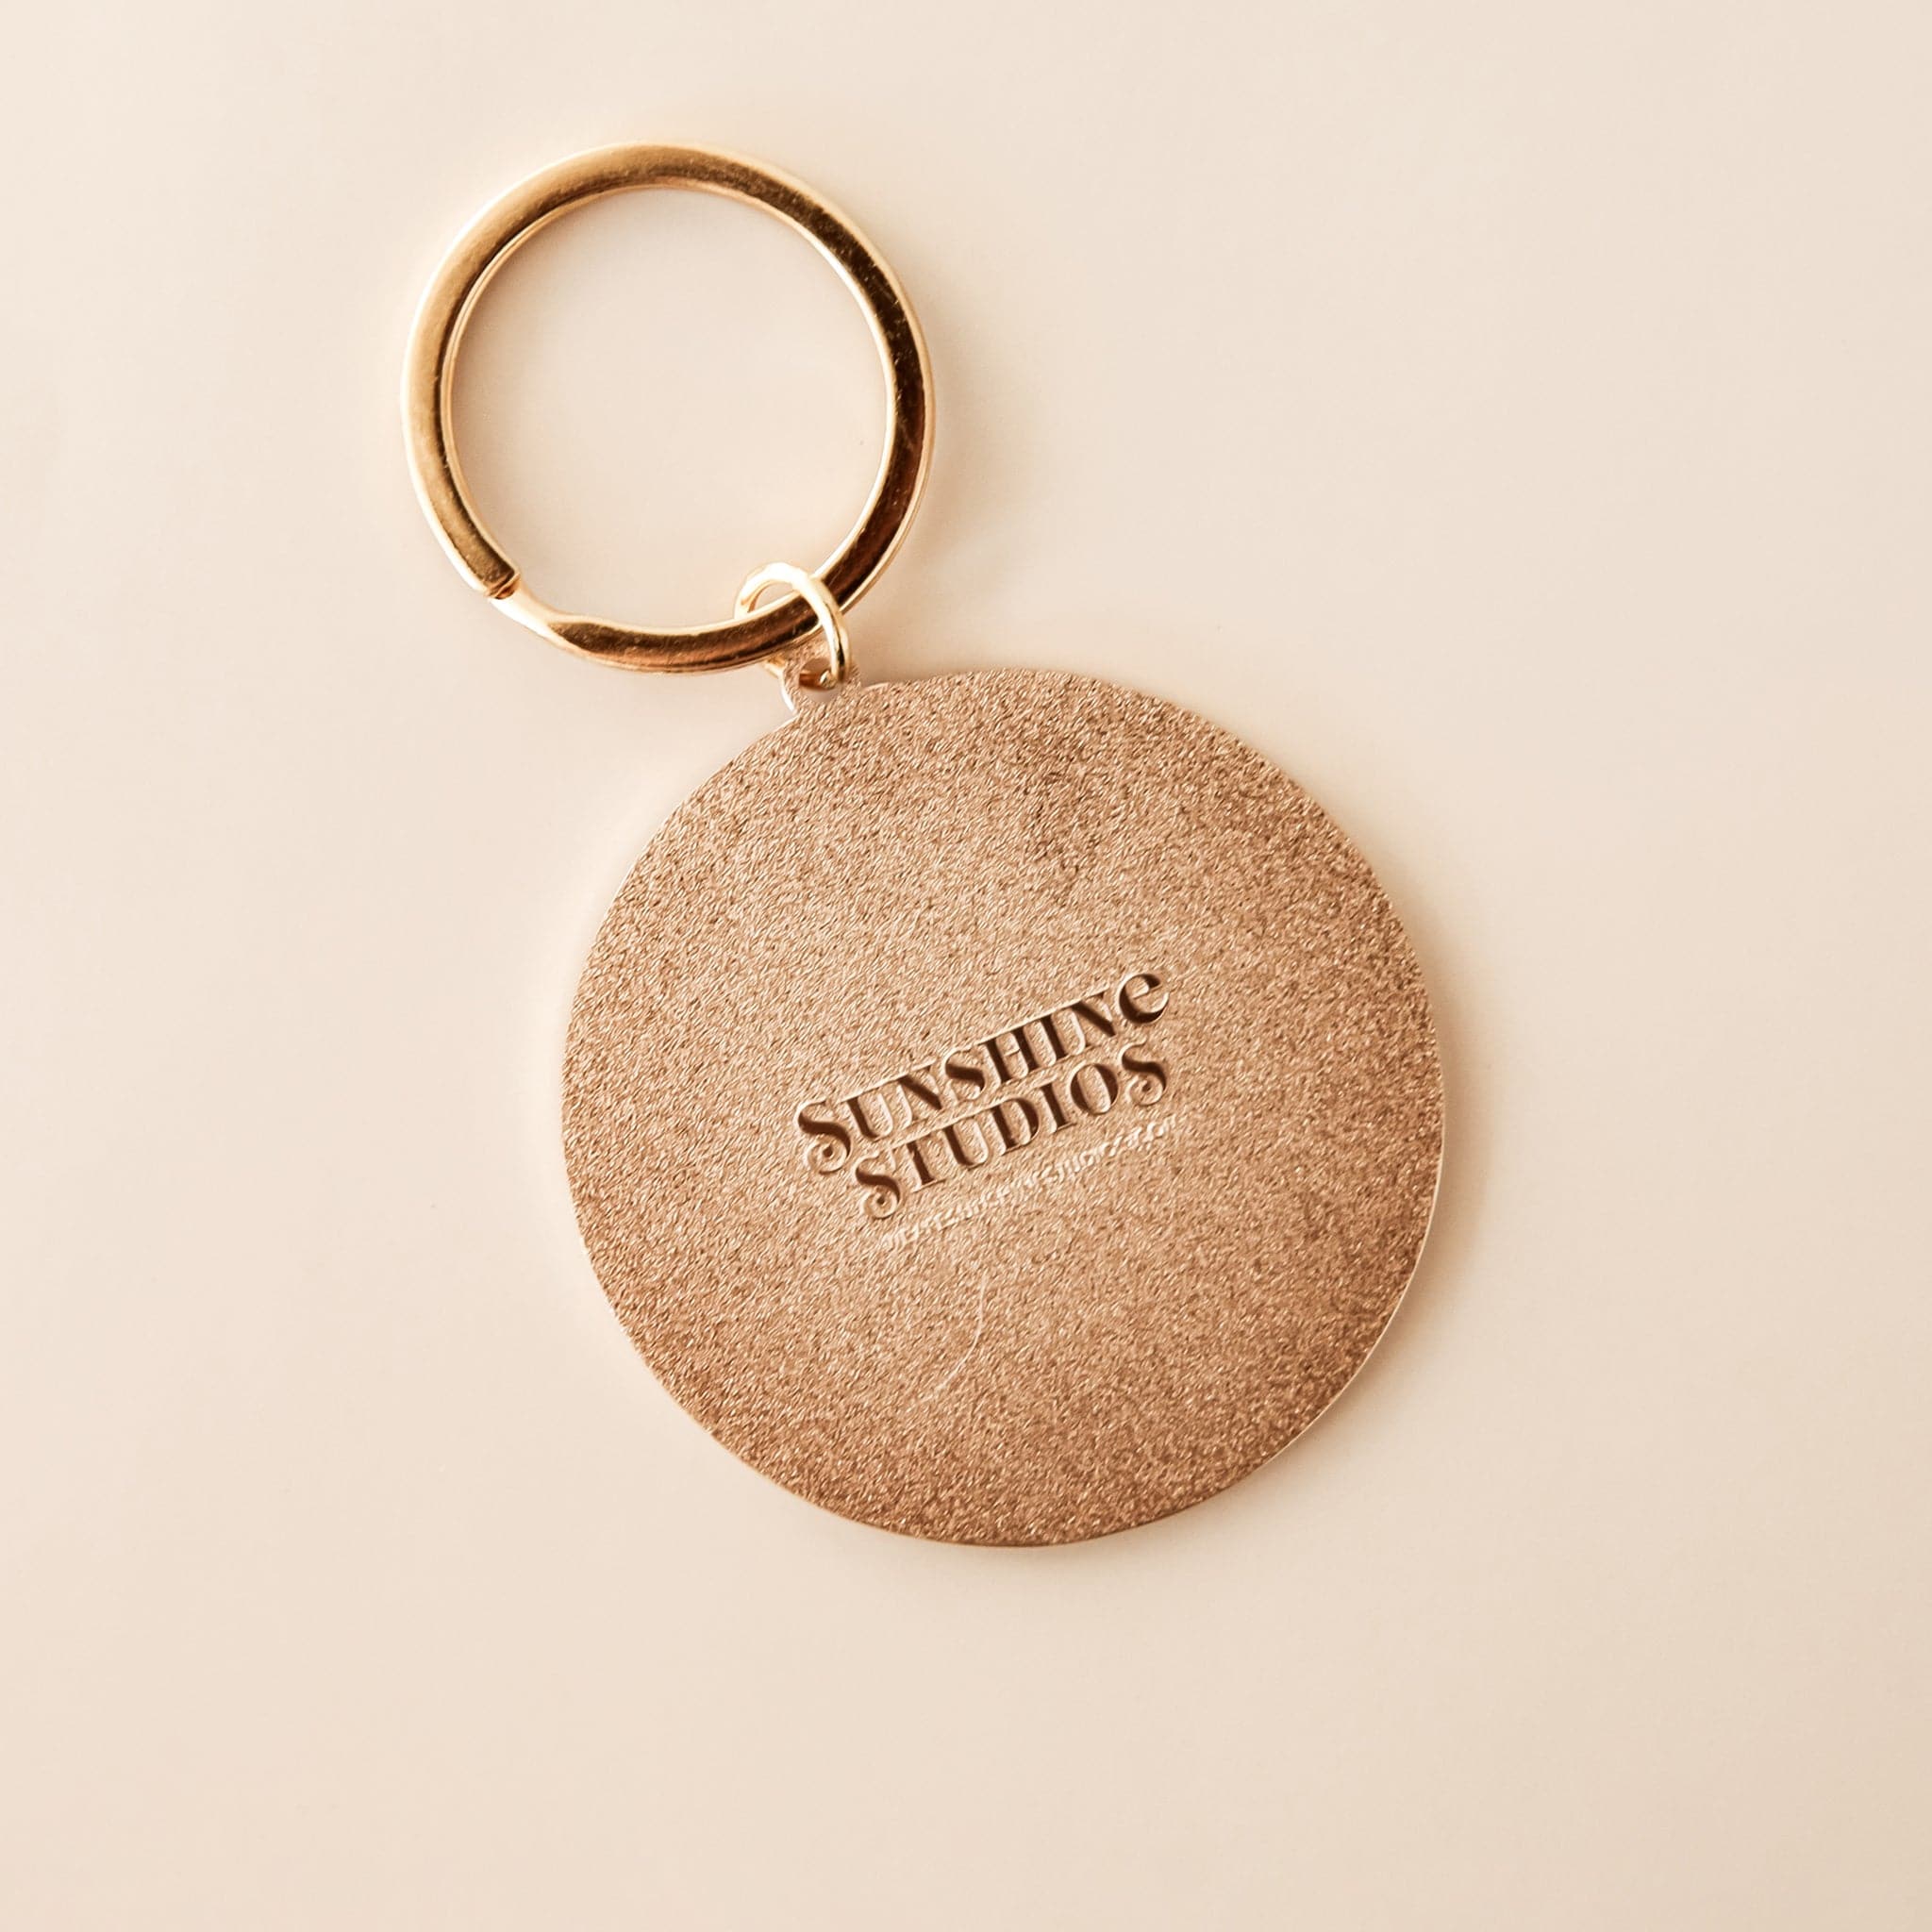 Textured backside of round keychain reading &#39;sunshine studios&#39; in raised lettering. The keychain is complete with a golden keychain loop.